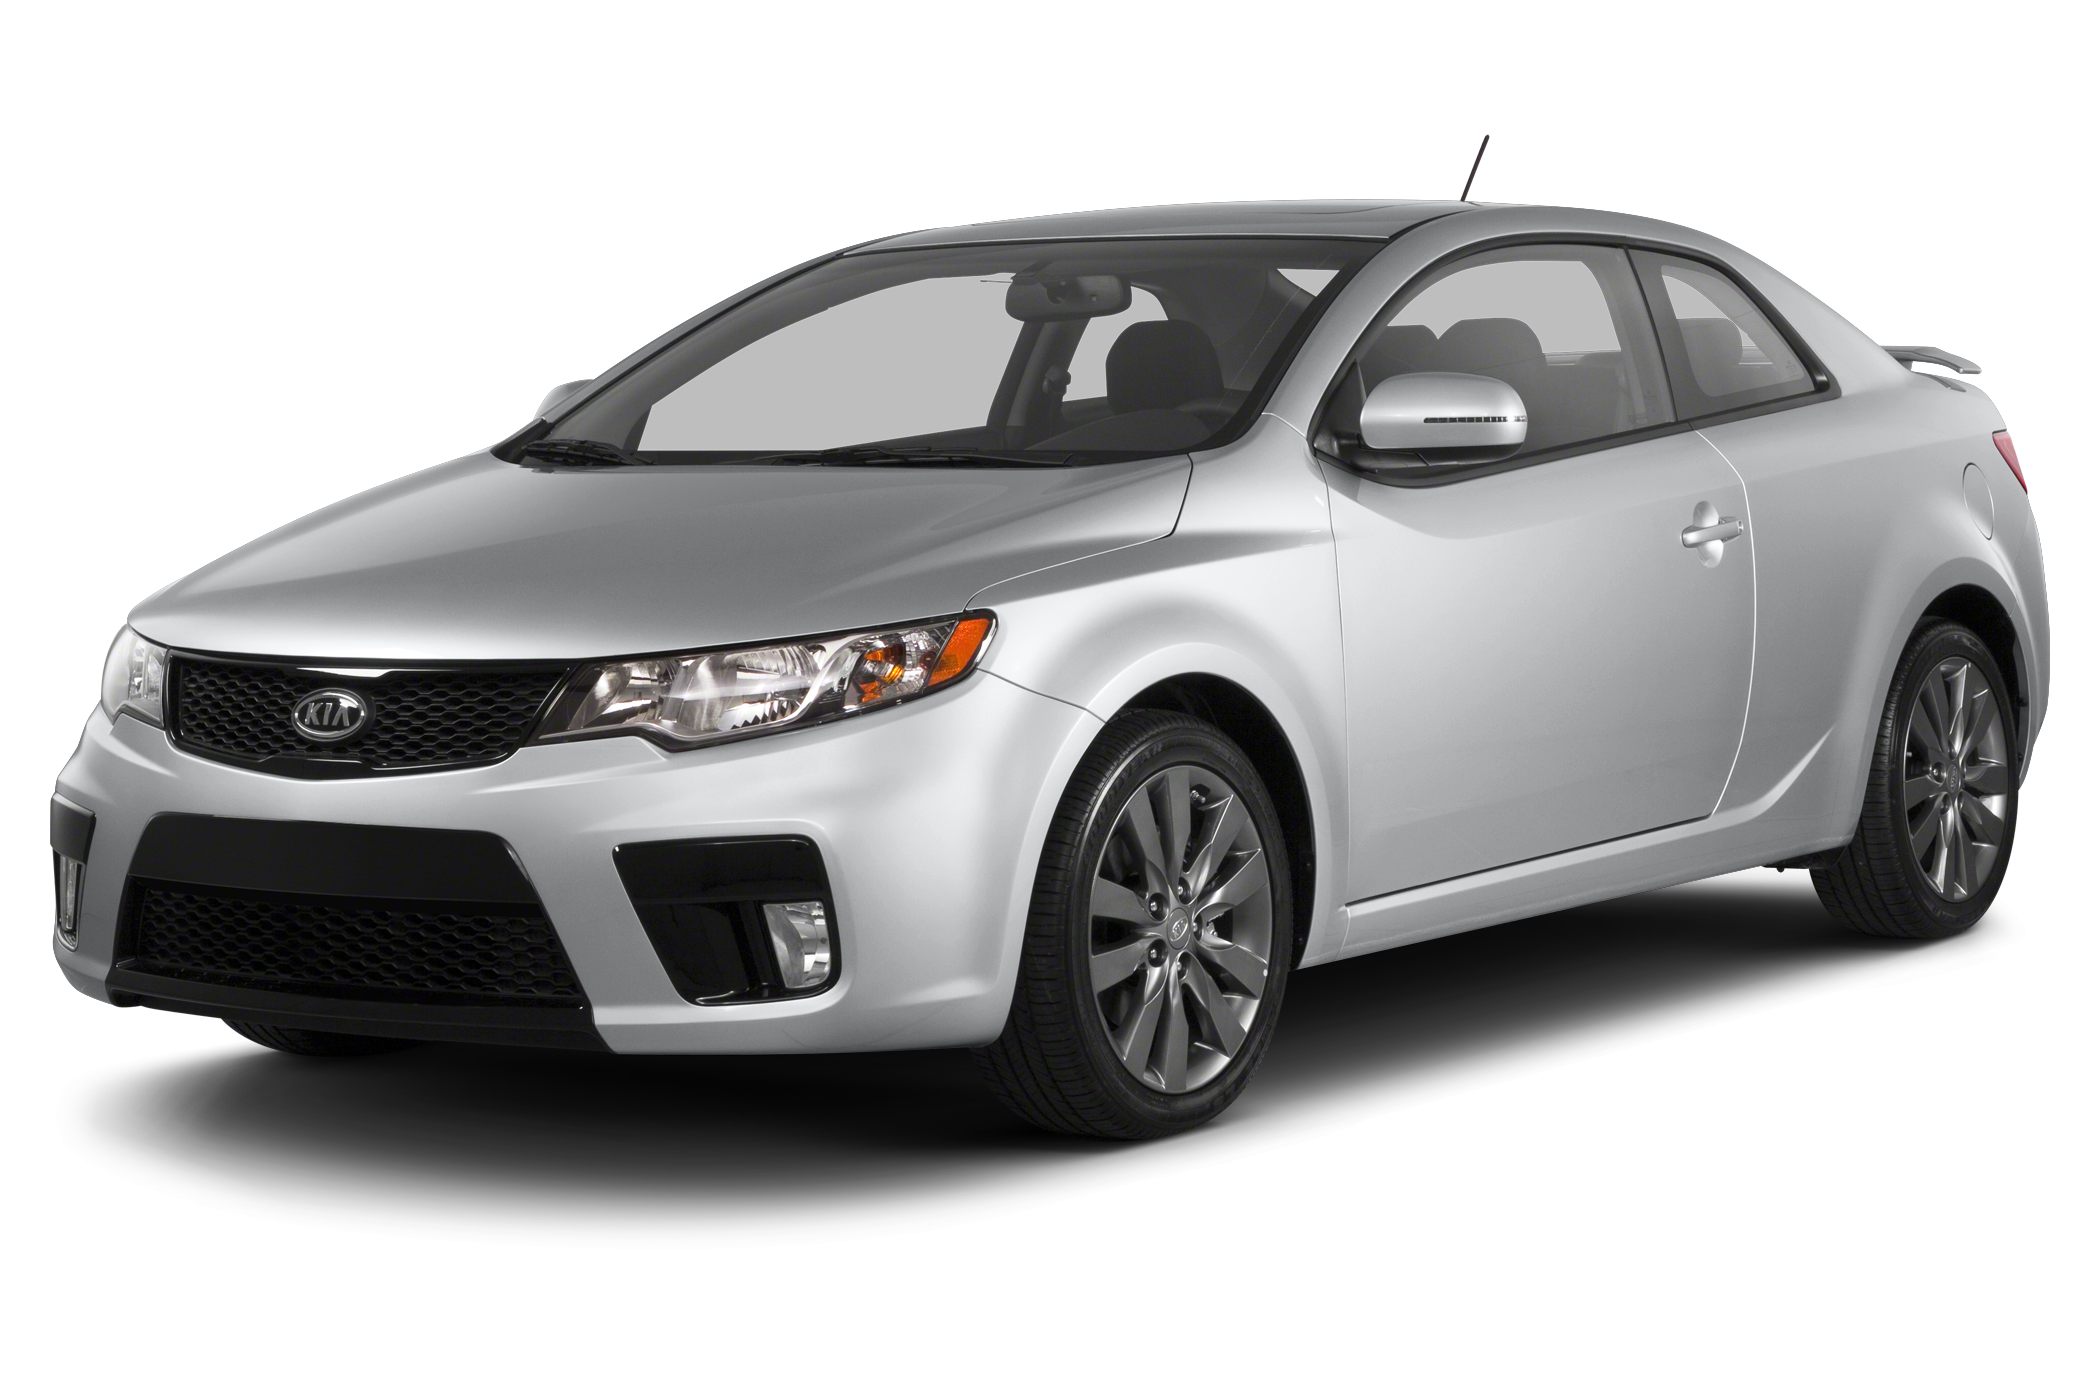 2013 Kia Forte Koup Sx 2dr Coupe Pictures